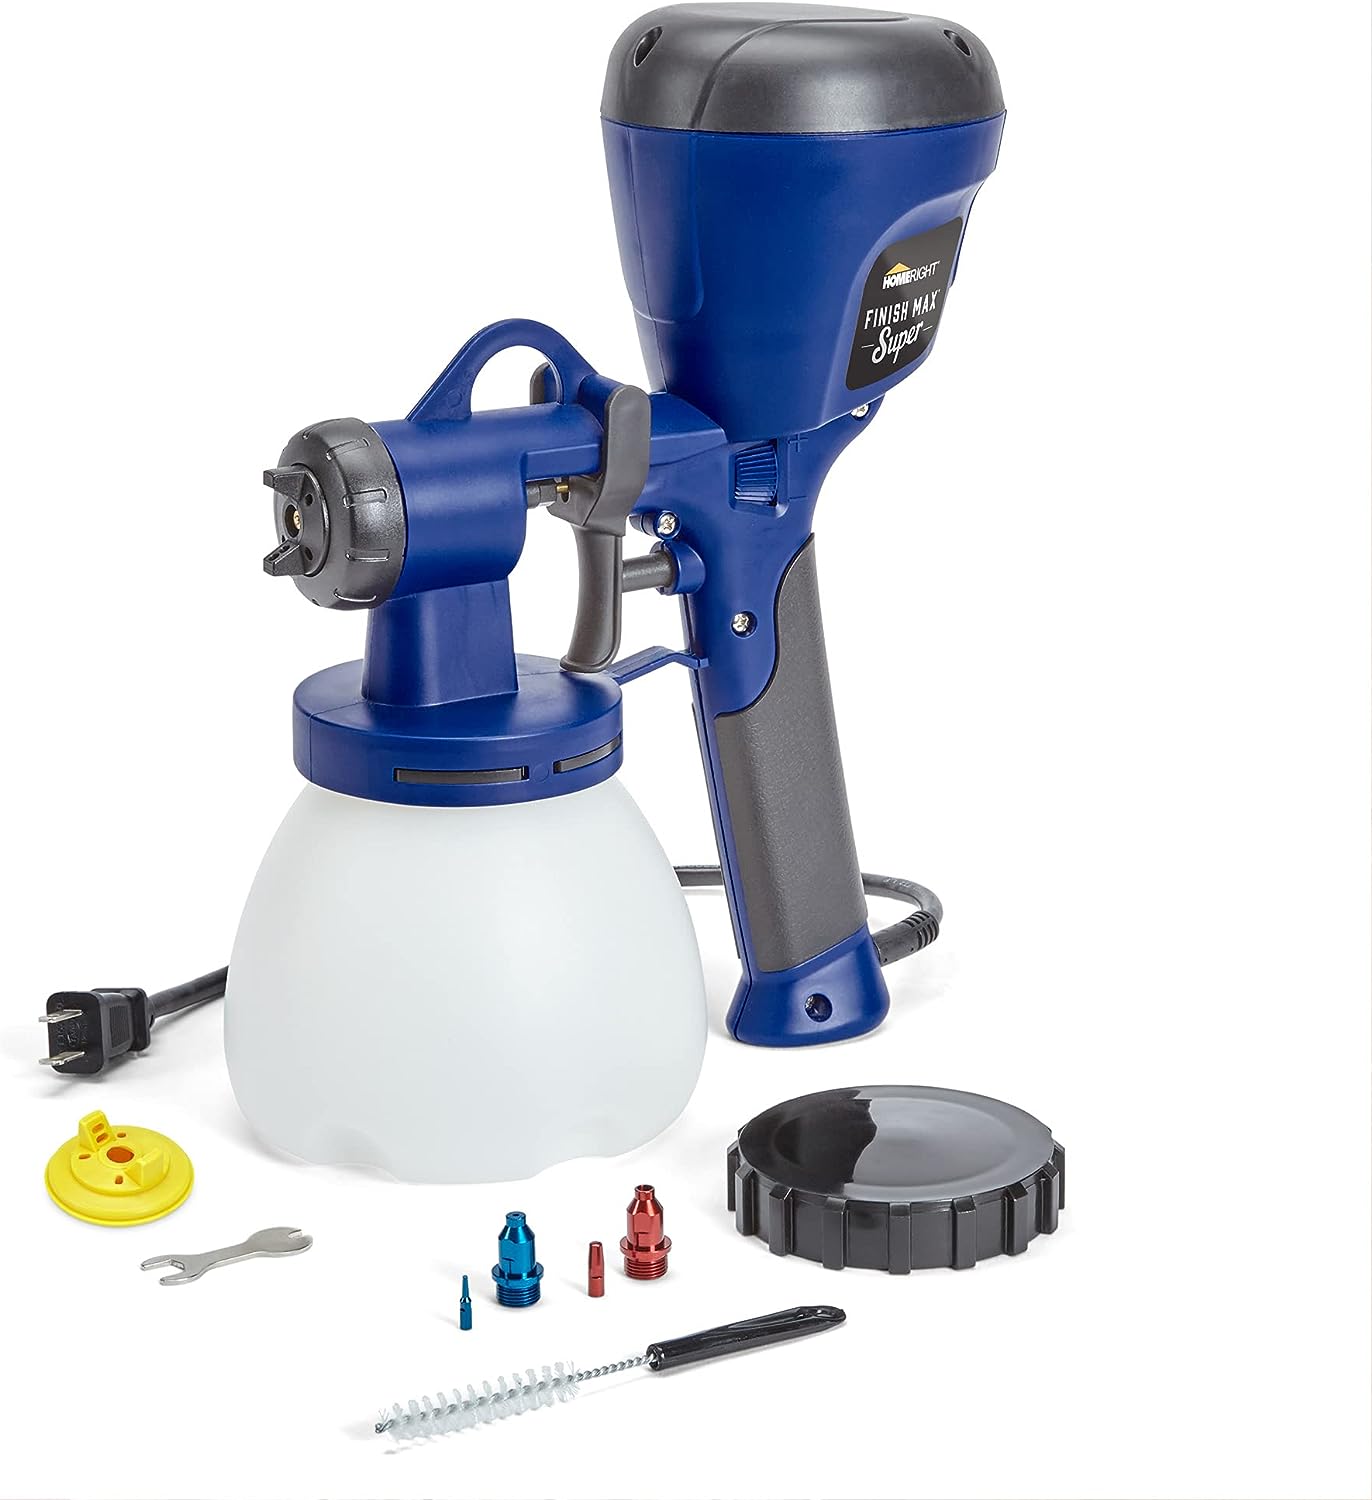 paint sprayer for fine finish detailed review